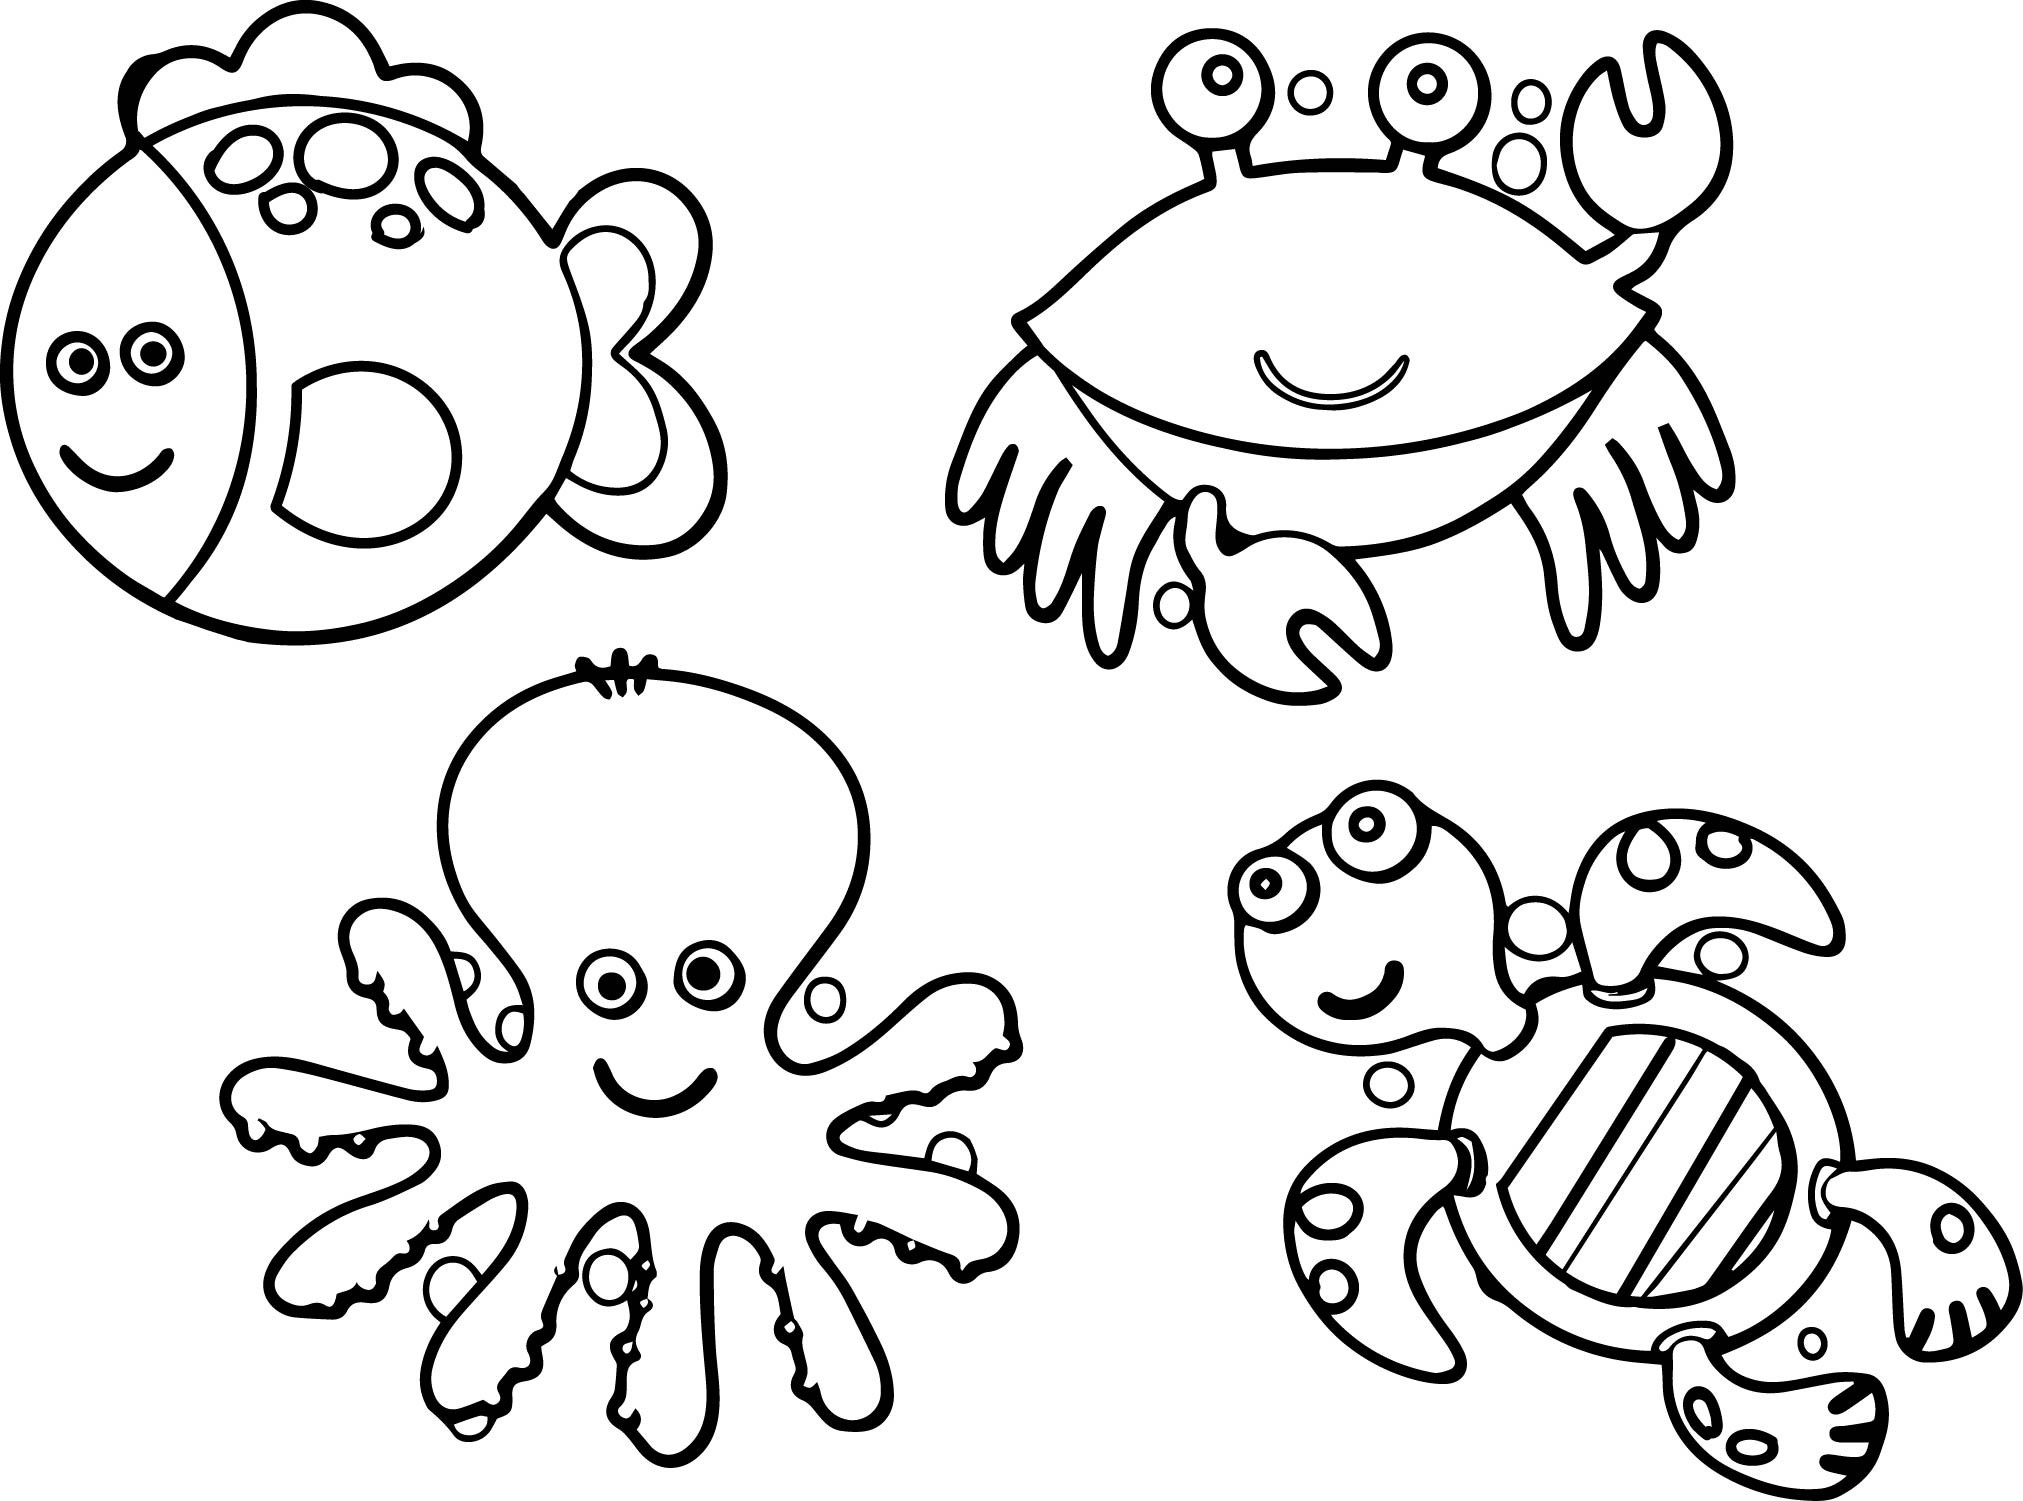 Free Worm Coloring Pages For Your Little Ones